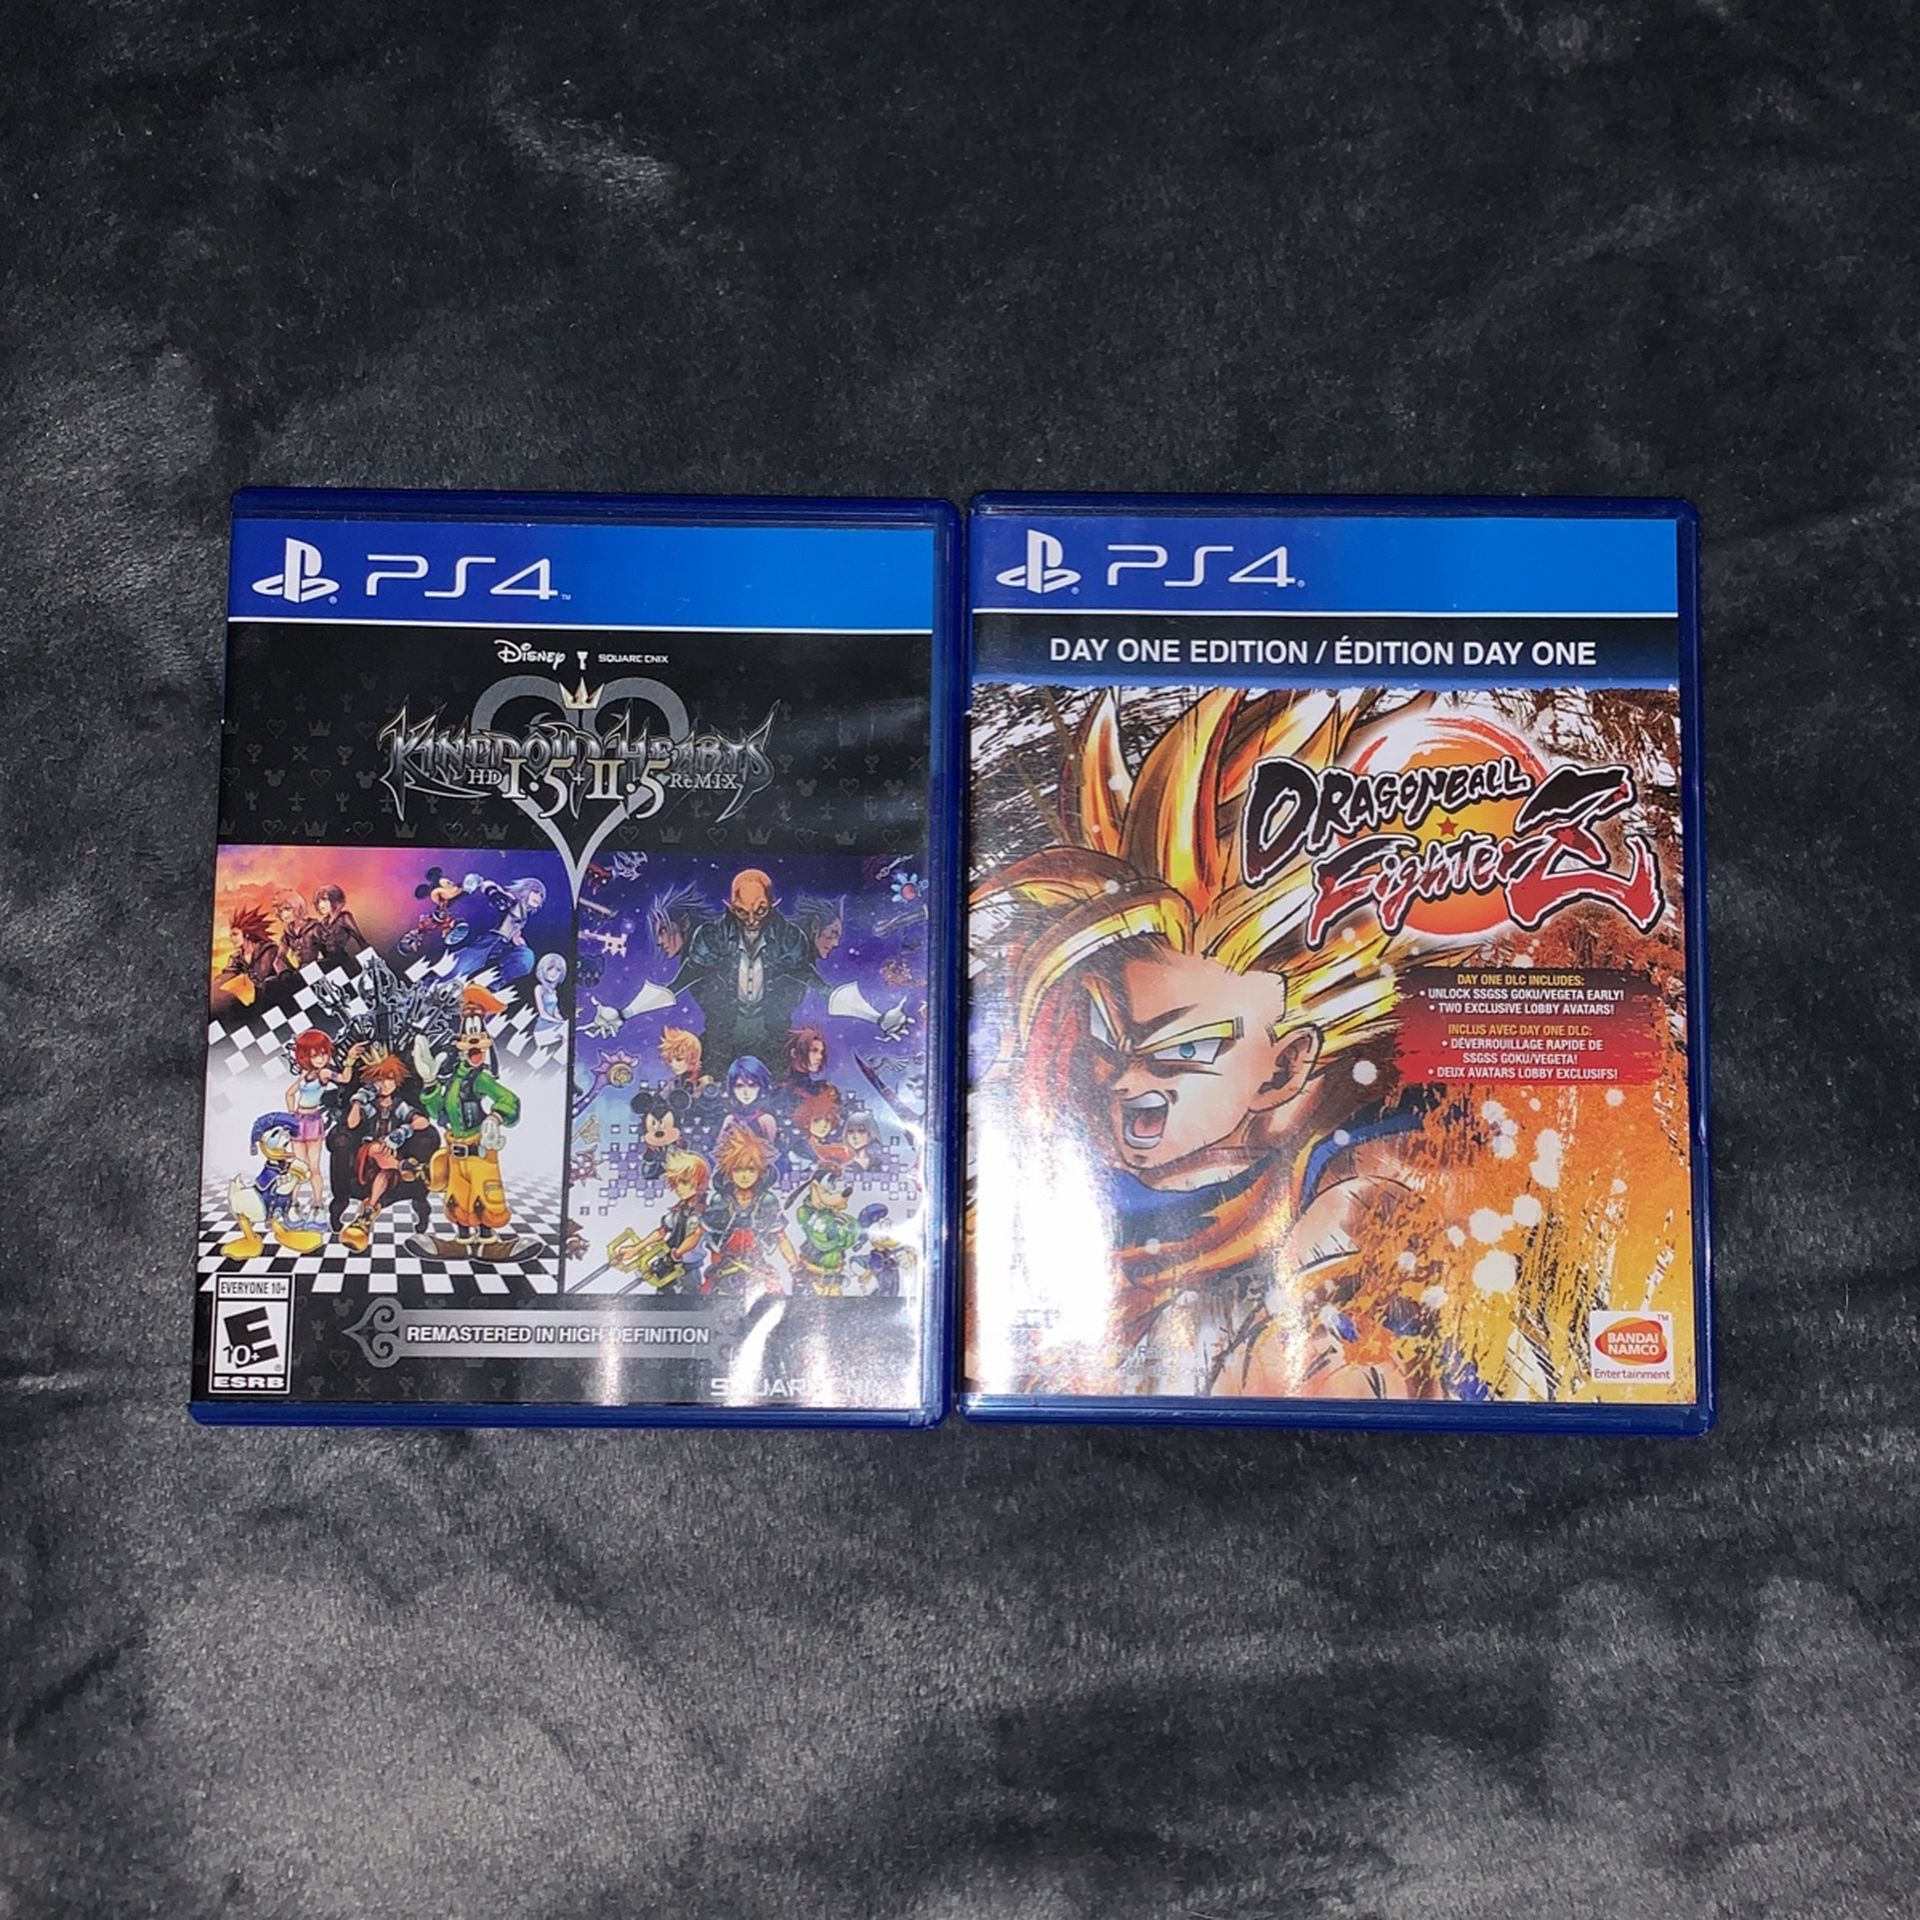 Dragonball Fighter Z and Kingdom Hearts 1.5 + 2.5 Remix